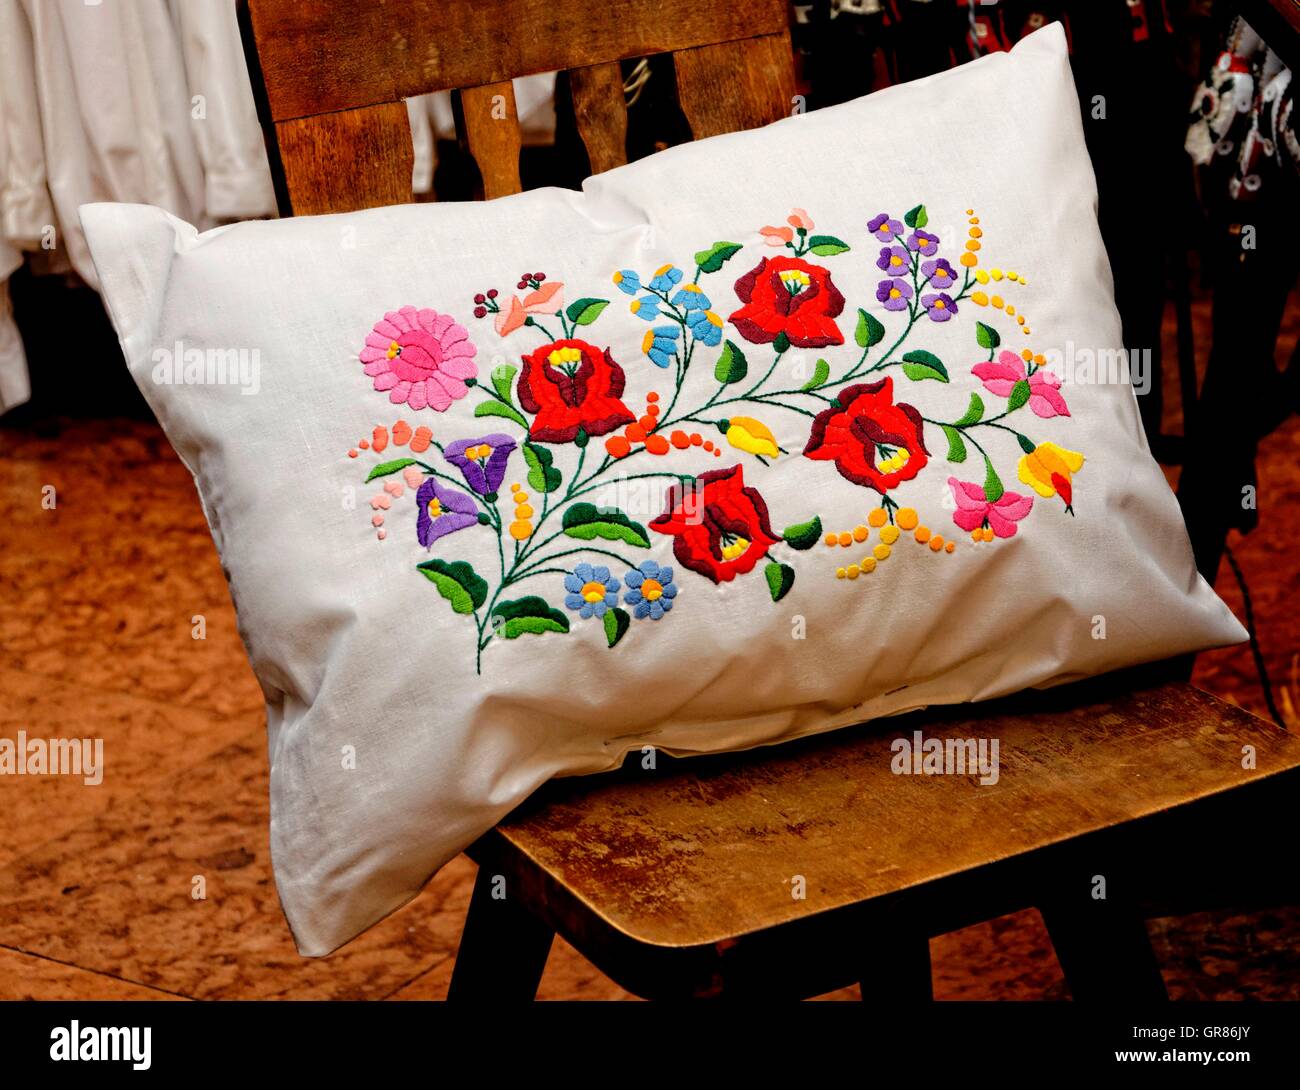 Weisses Pillows With Embroideries From Kalocsa, Hungary Stock Photo